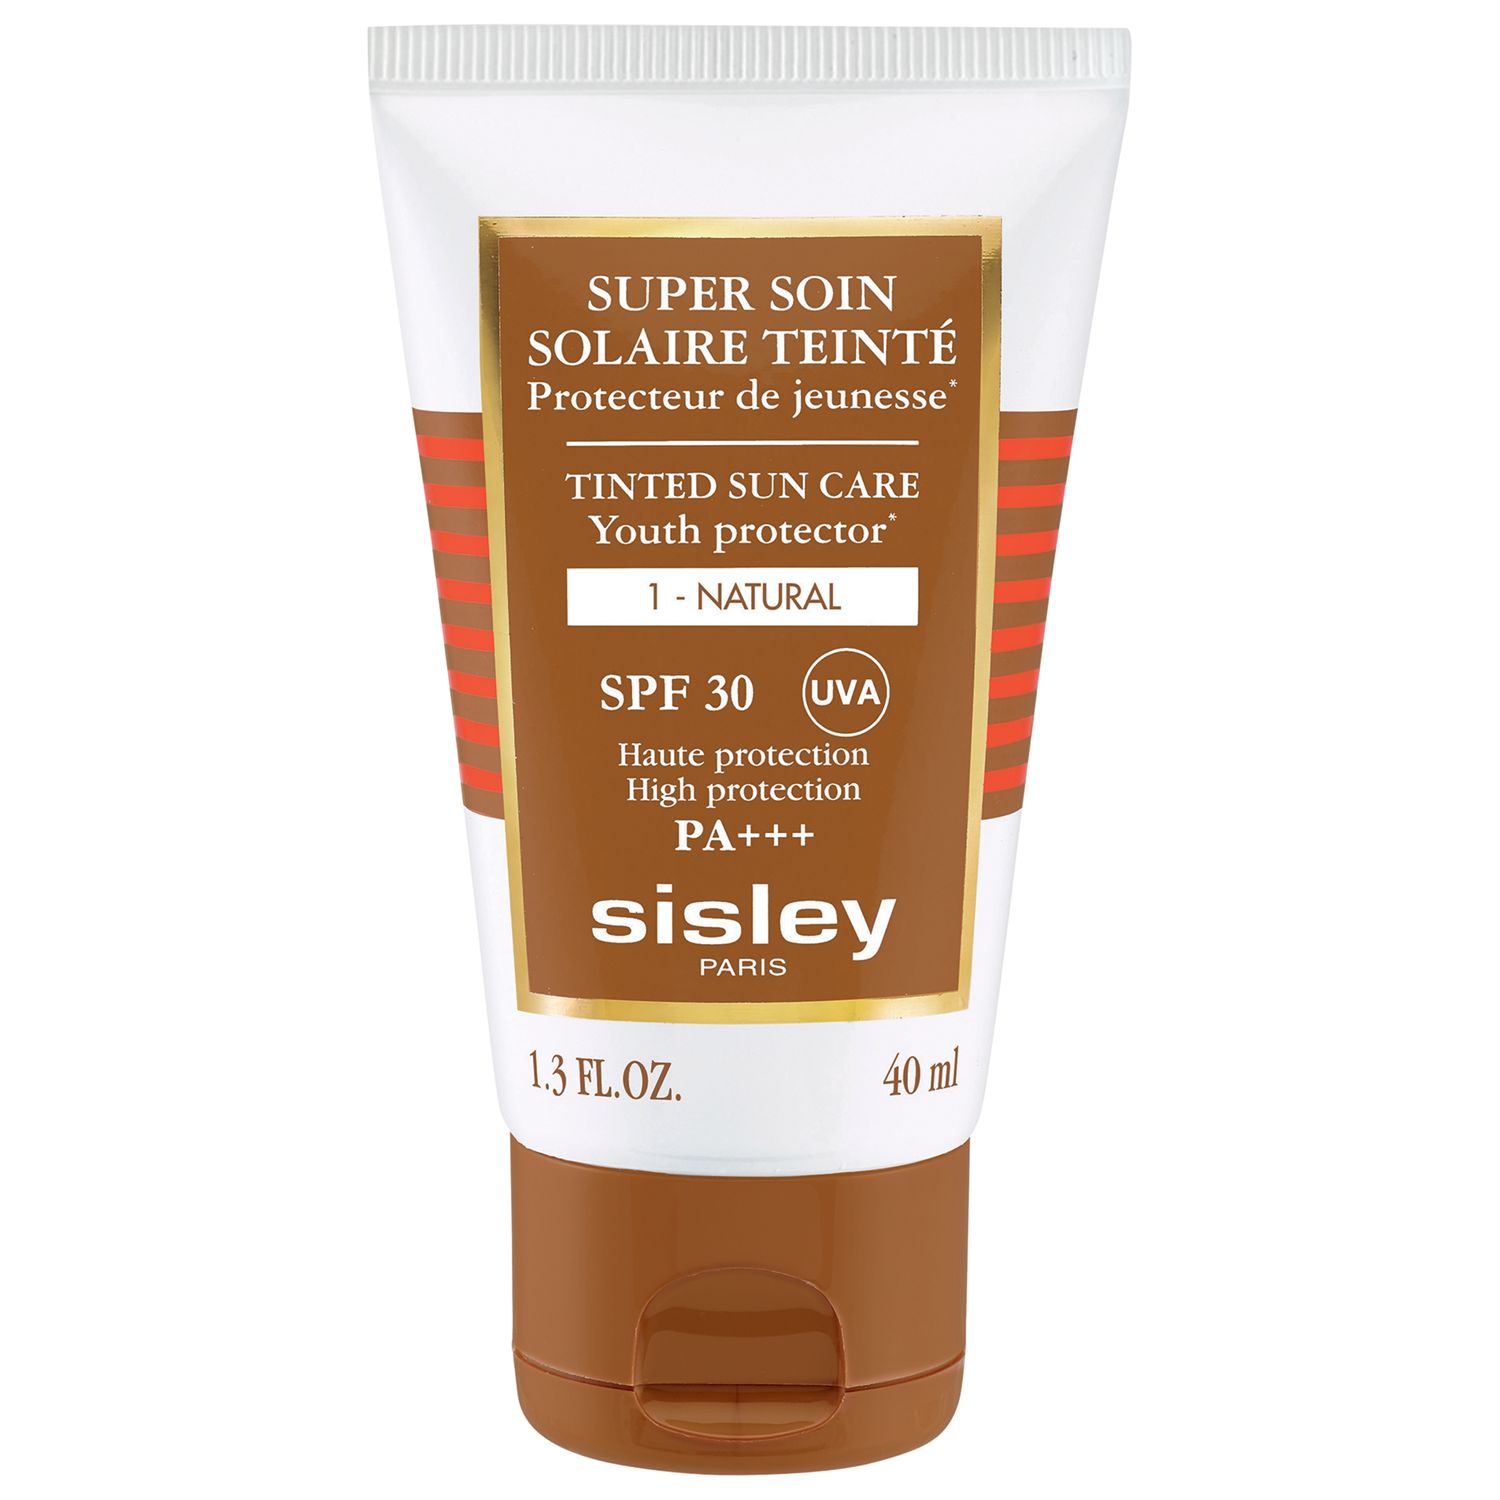 Sisley-Paris Super Soin Solaire Tinted Sun Care SPF 30, 1 Natural